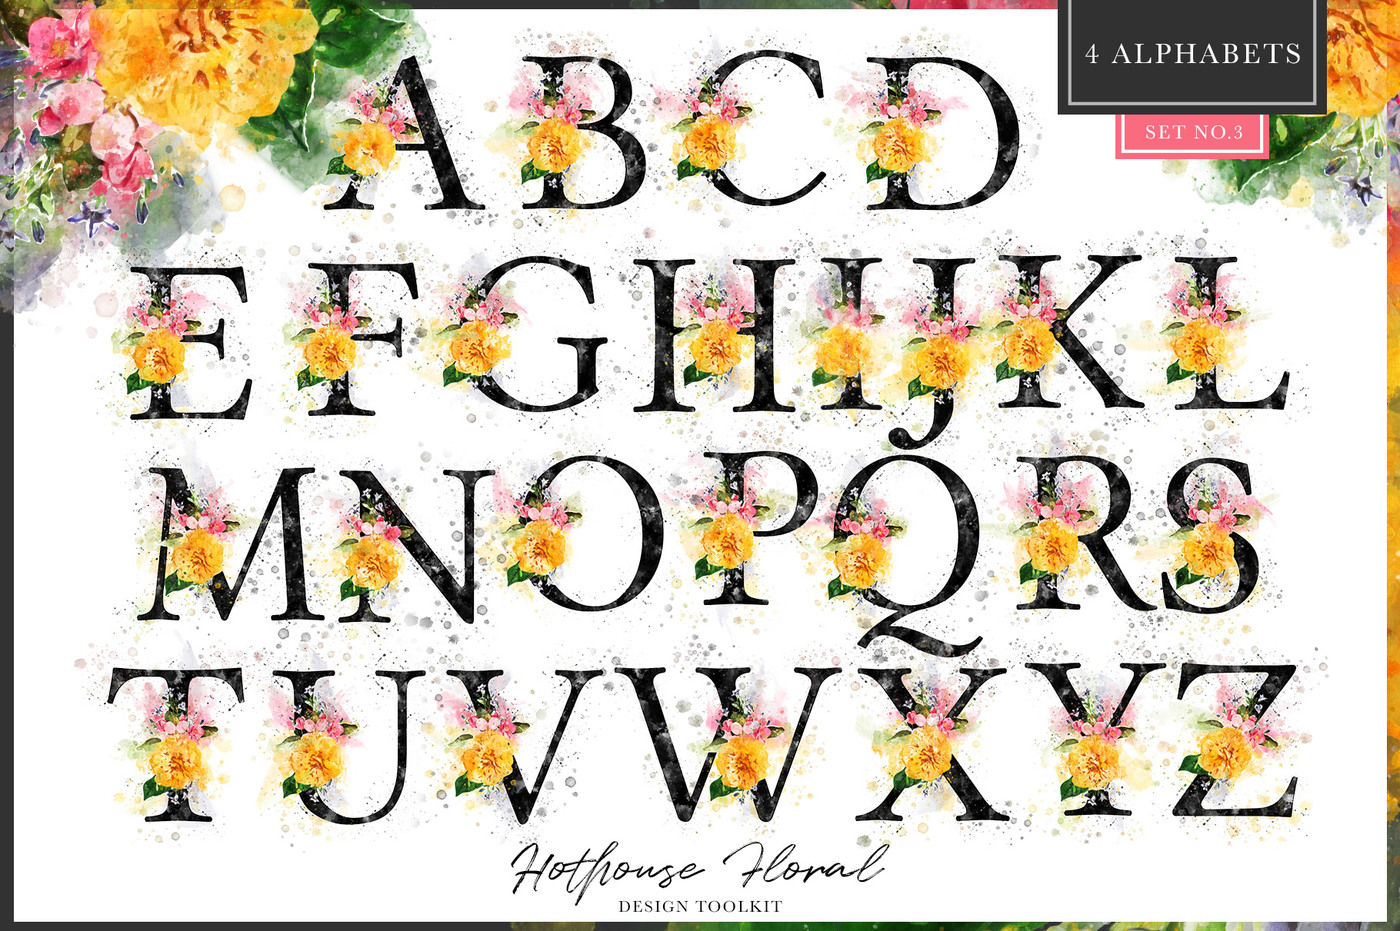 Hothouse Floral Design Toolkit By Avalon Rose Design Thehungryjpeg Com